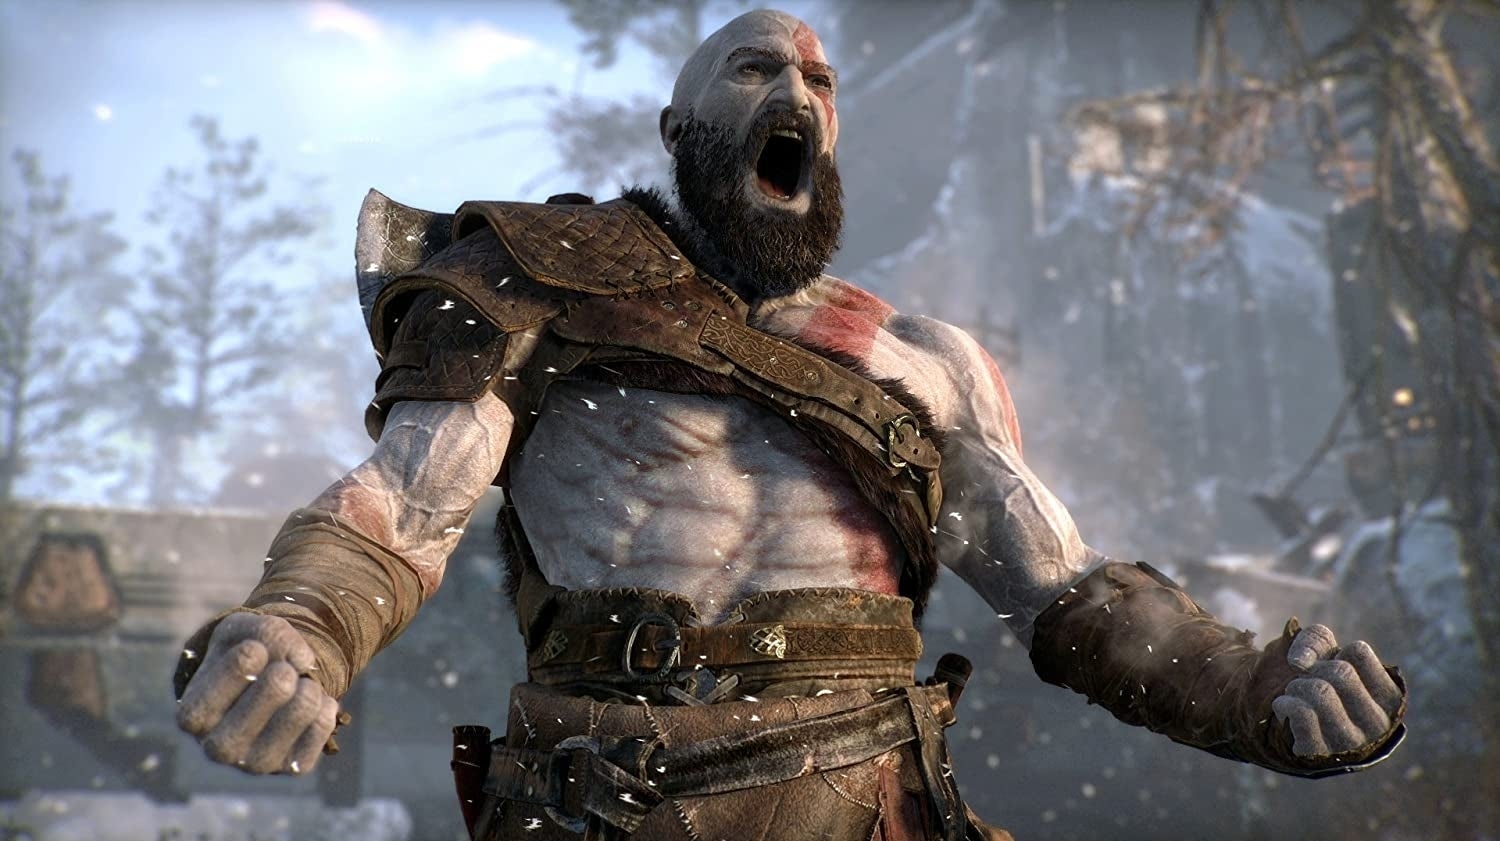 Ærlighed Grusom performer God of War on PS5 runs at up to 60fps - and progress carries over from PS4  | Eurogamer.net